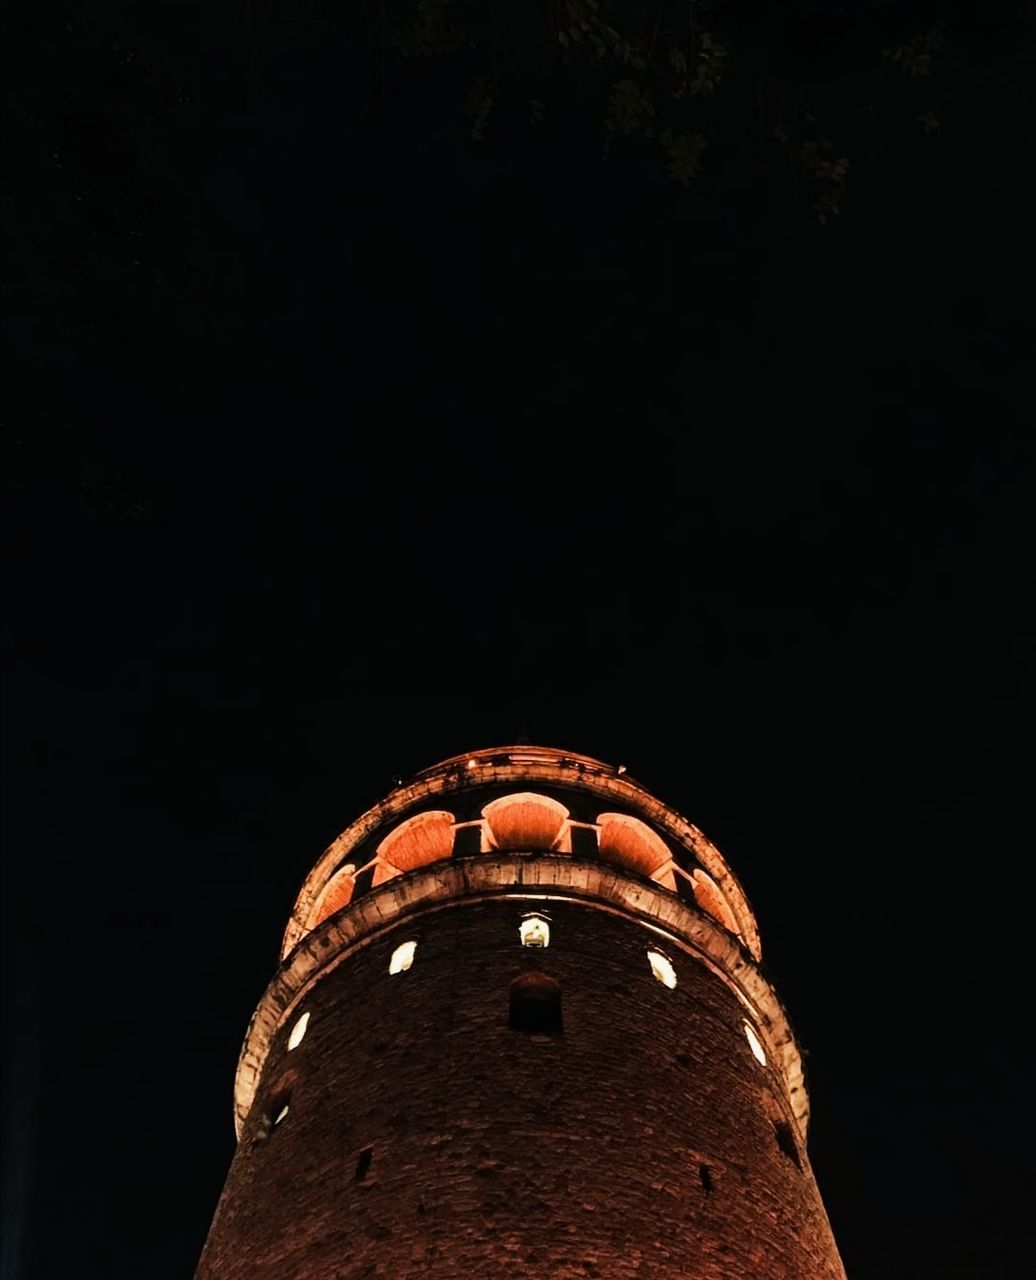 darkness, night, architecture, light, built structure, building exterior, history, no people, low angle view, the past, copy space, sky, travel destinations, reflection, nature, building, lighting, tower, brick